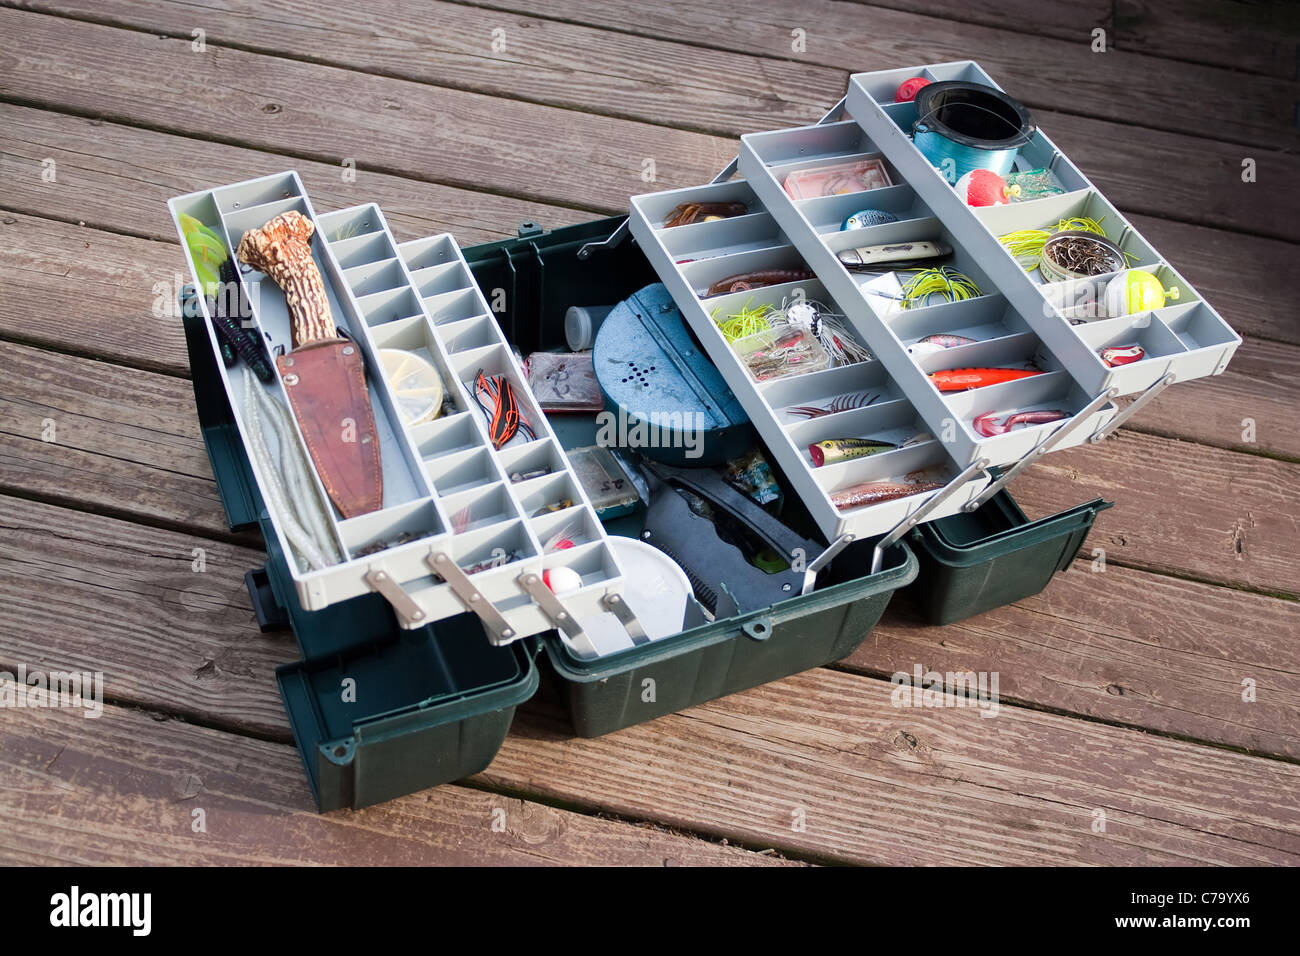 https://c8.alamy.com/comp/C79YX6/a-large-fishermans-tackle-box-fully-stocked-with-lures-and-gear-for-C79YX6.jpg